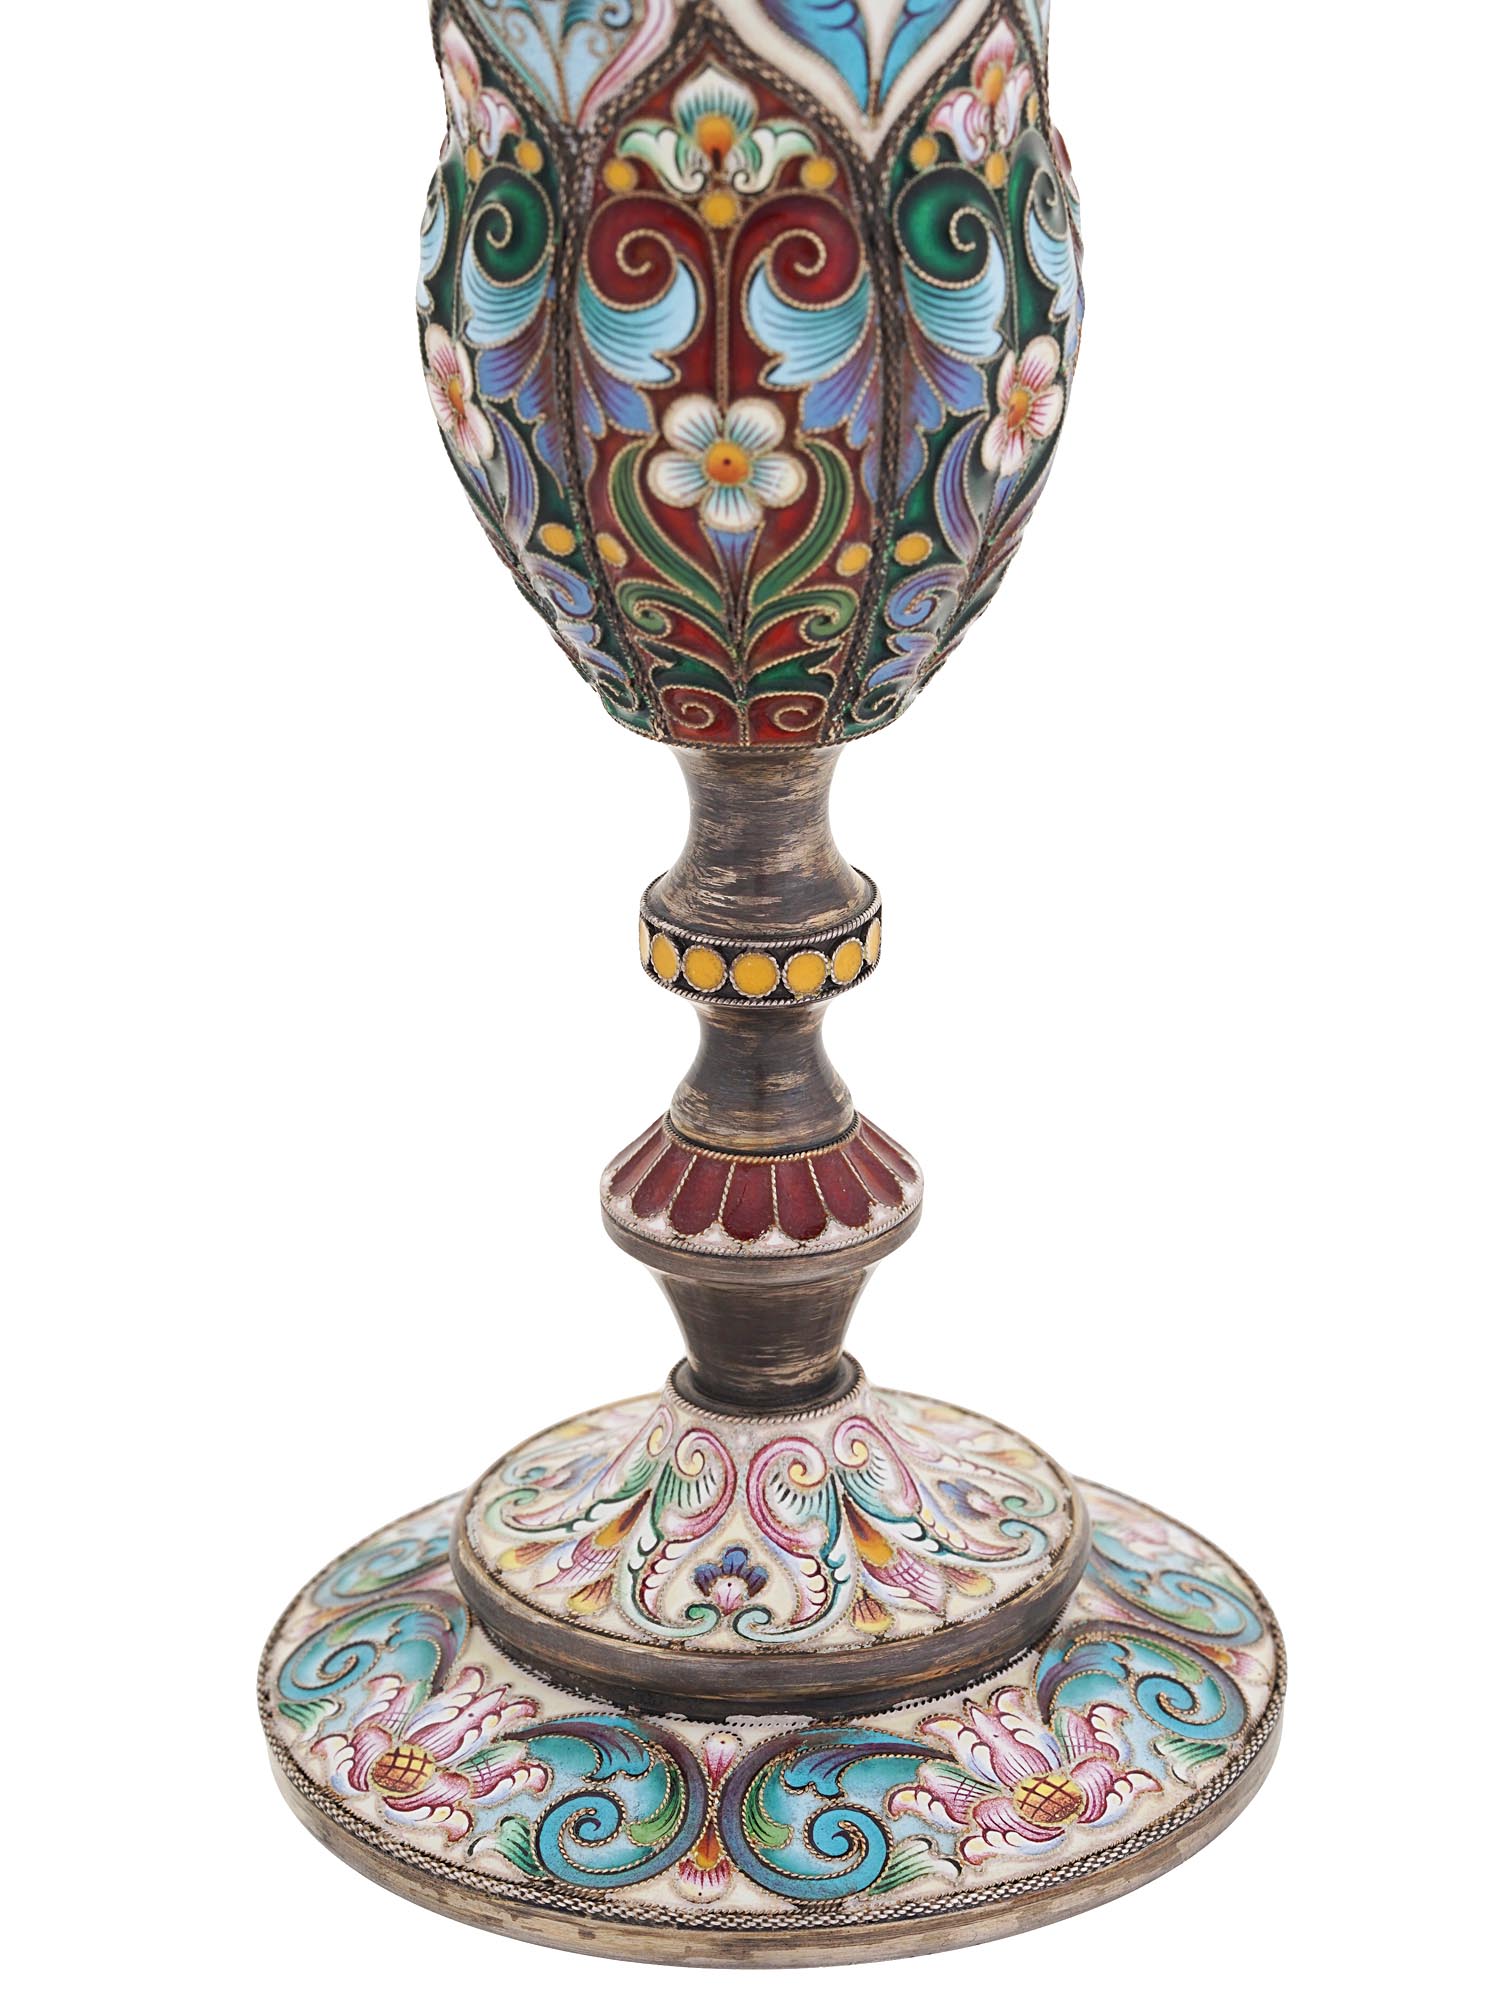 TALL RUSSIAN 88 SILVER CLOISONNE ENAMEL GOBLET PIC-5